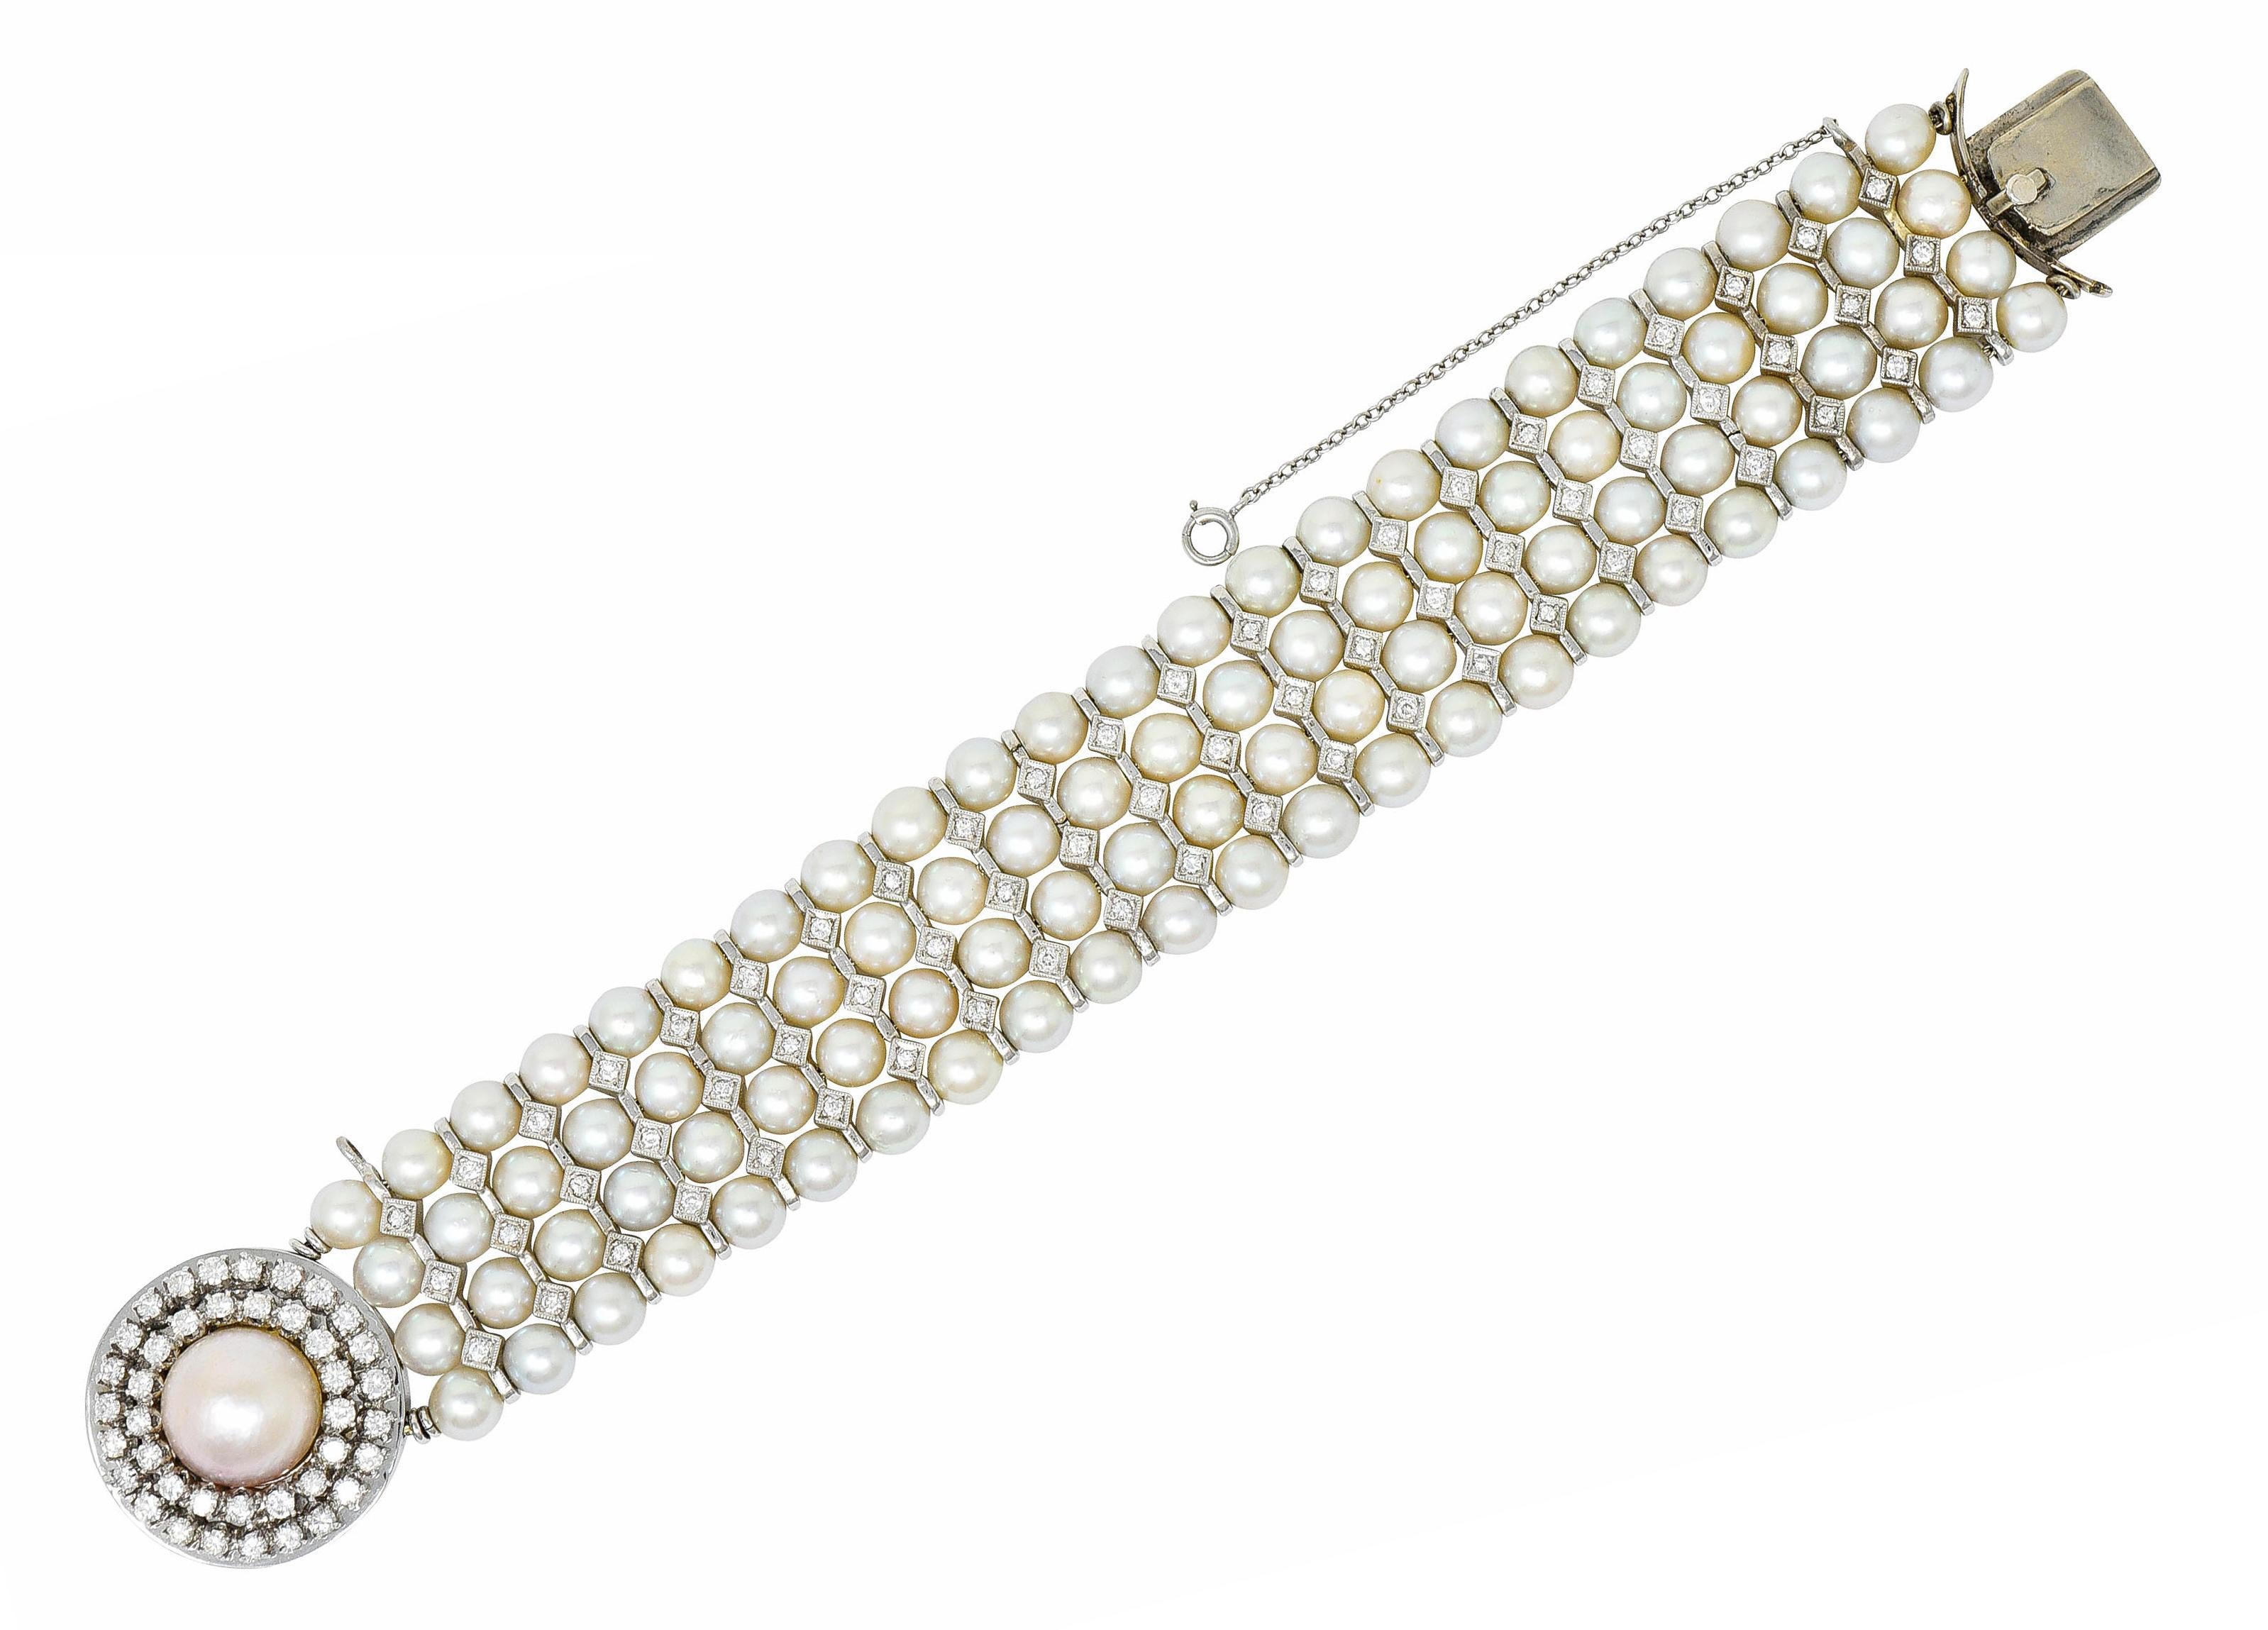 Bracelet is comprised of four strands of 5.7 mm round cultured pearls

Gray to cream body color with strong rosè and silvery overtones - excellent in luster

With bar spacer links interspersed throughout accented by round brilliant cut